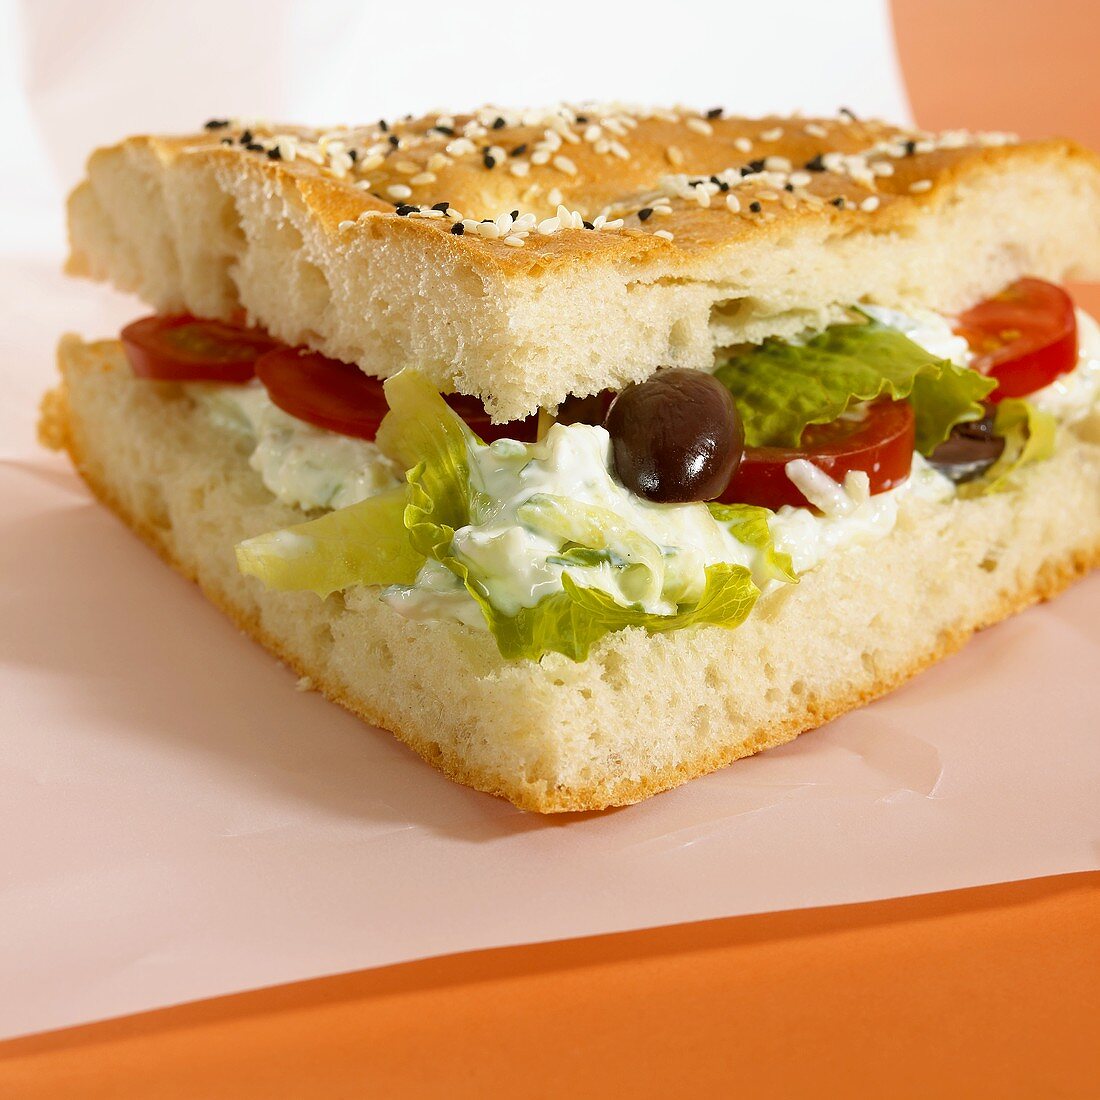 Pita bread filled with vegetables and soft cheese